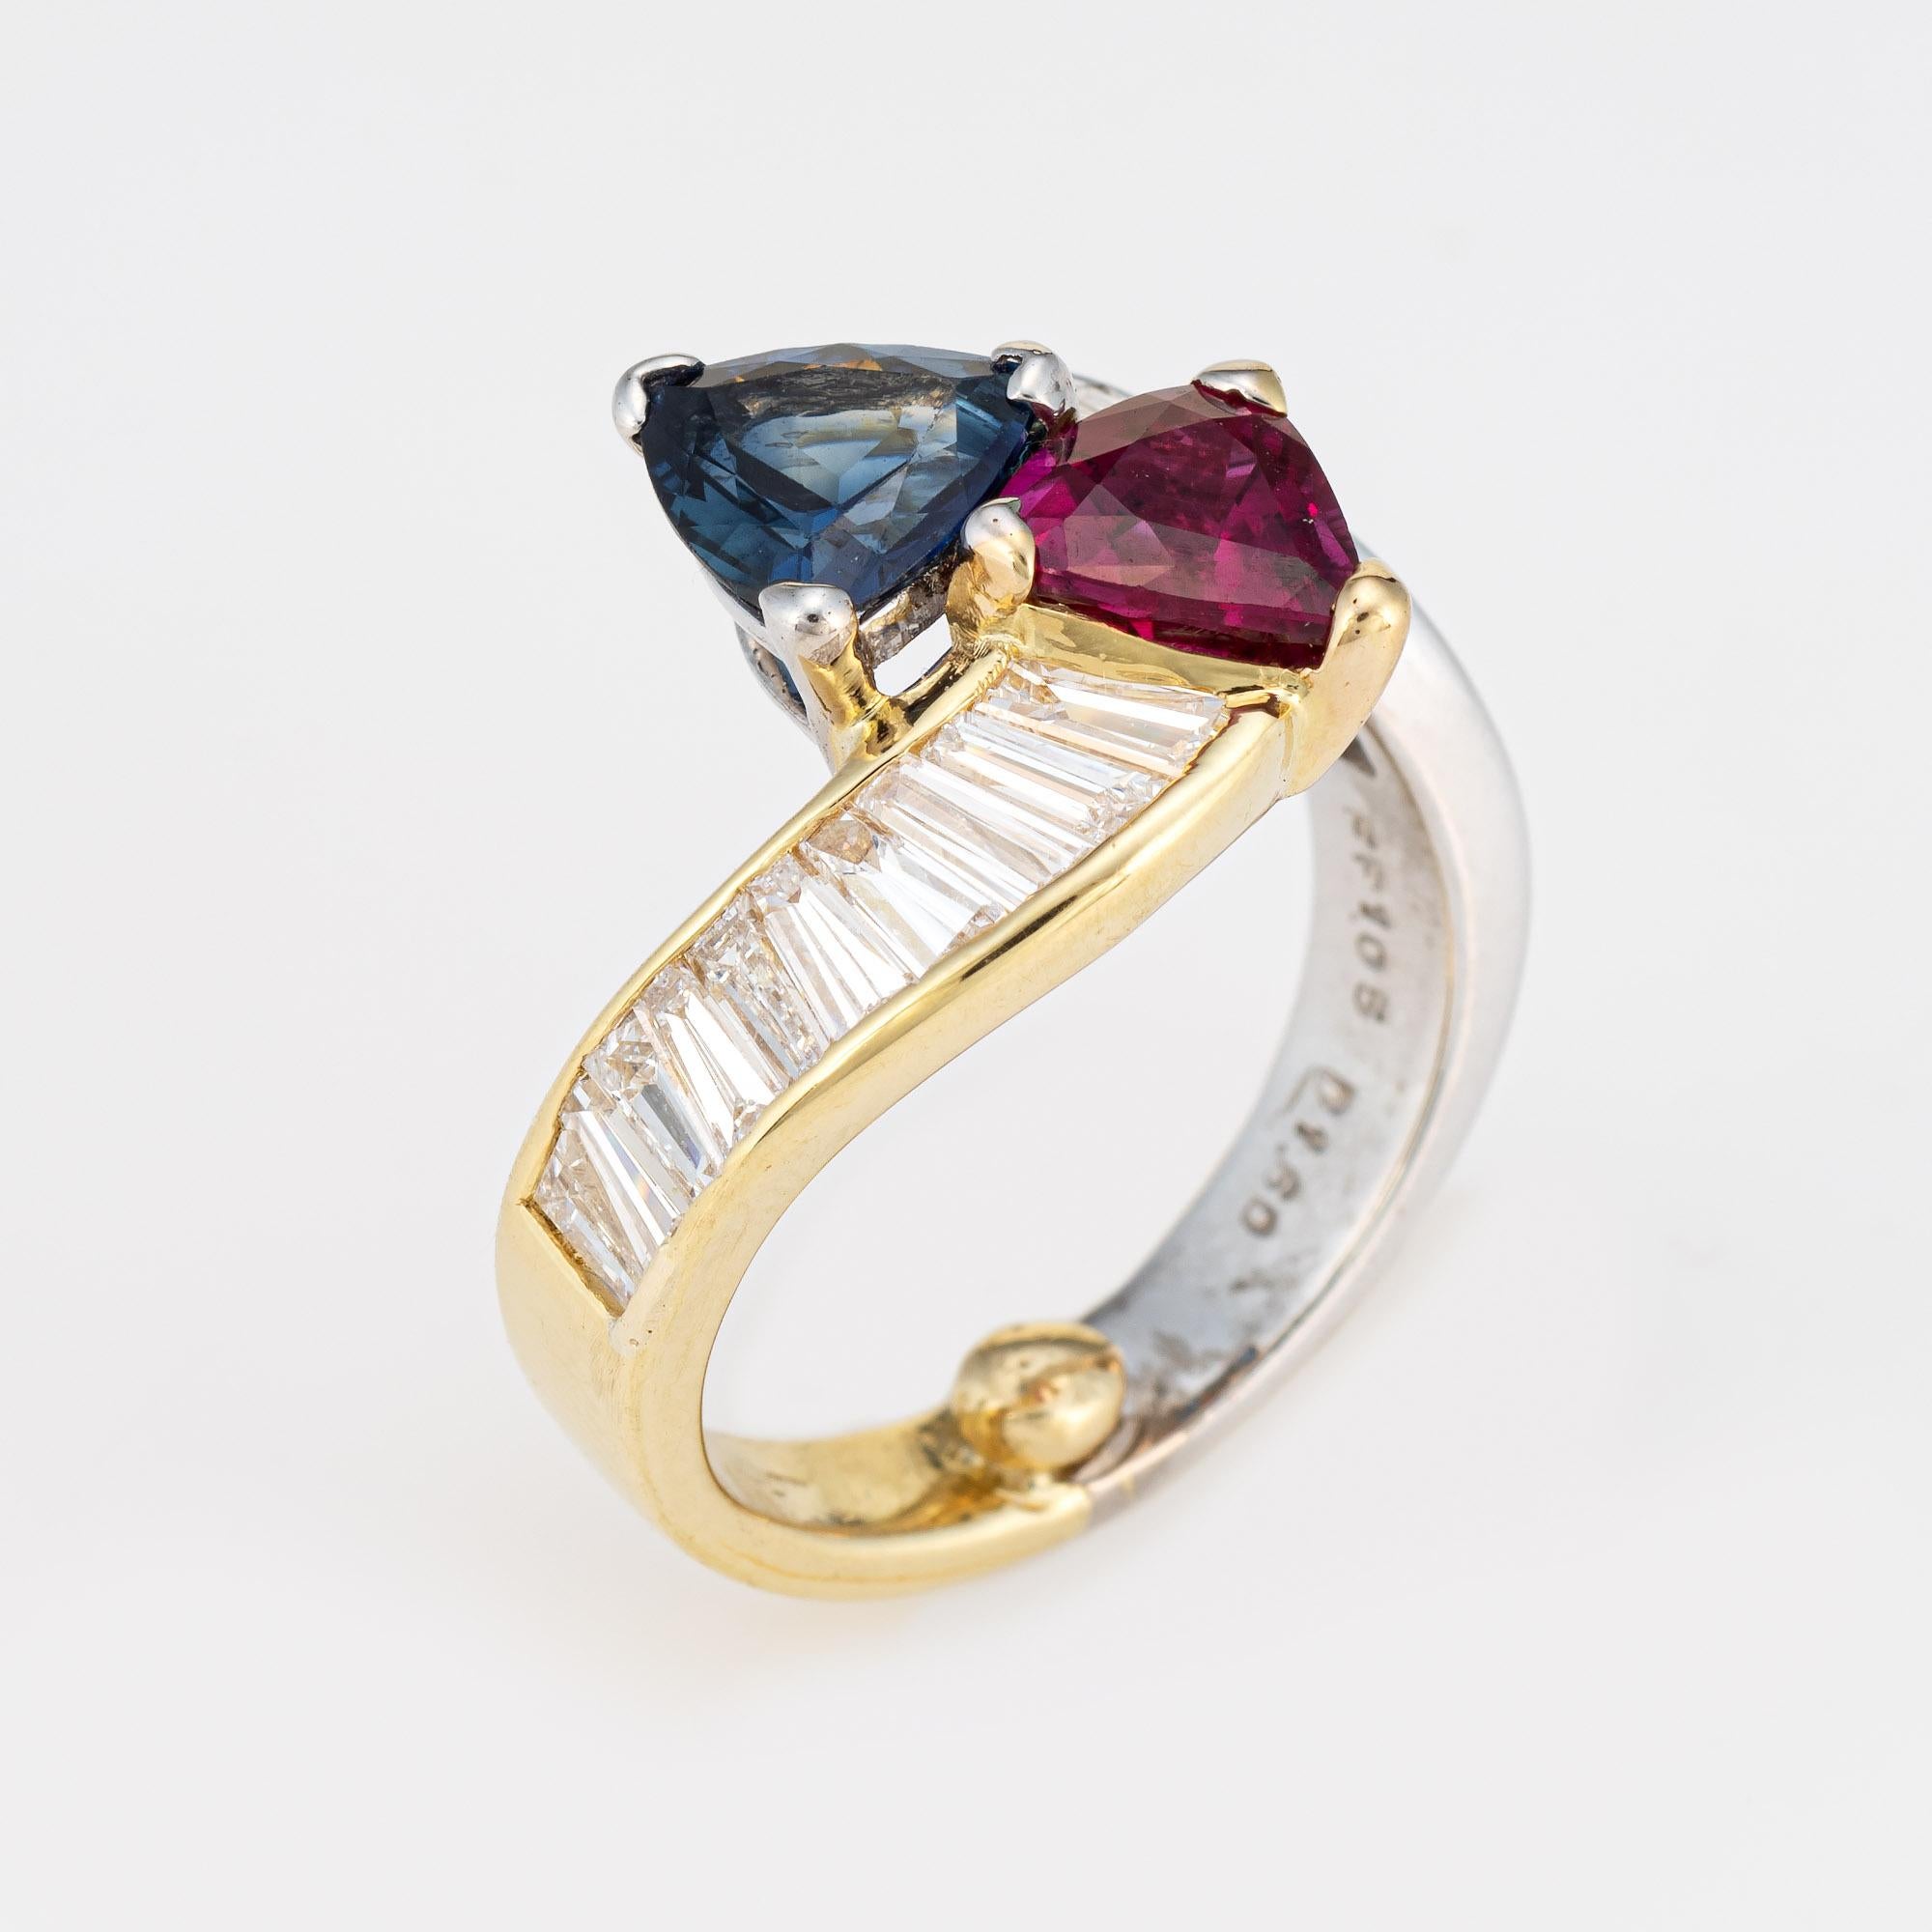 Finely detailed vintage natural ruby & sapphire 'moi et toi' ring crafted in 18k yellow & white gold (circa 1980s to 1990s).  

One triangle brilliant cut natural ruby, approx. 1.30 carats (6.5 x 4.1mm), dark red color, lightly included, good cut,